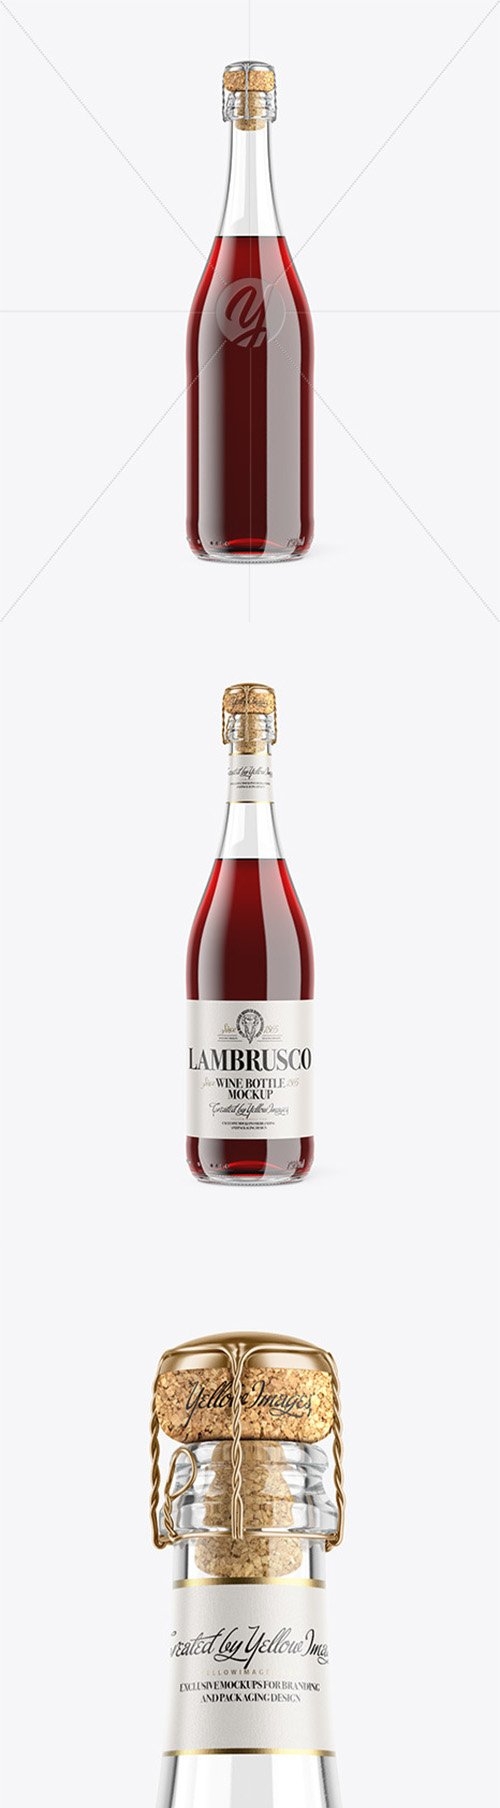 Clear Glass Lambrusco Bottle With Red Wine Mockup 62230